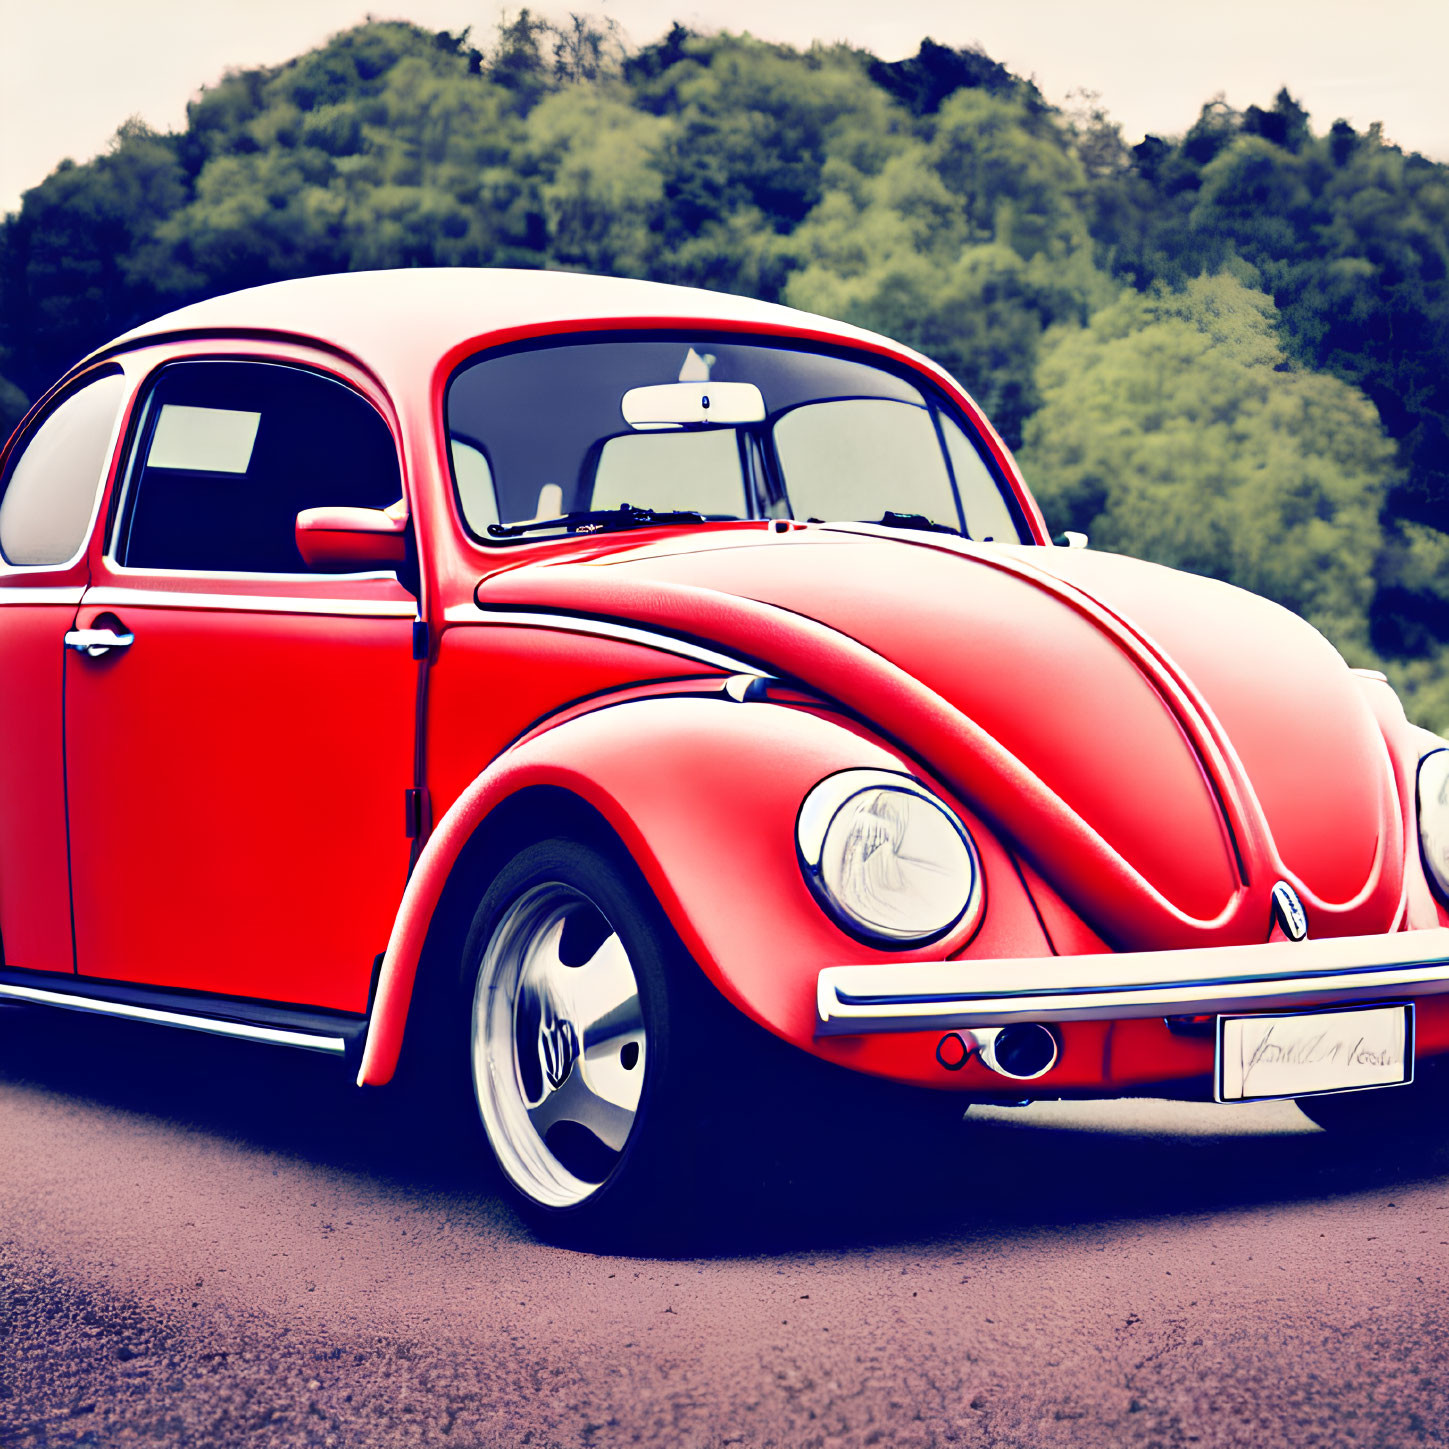 Vintage red Volkswagen Beetle with white roof parked on road amidst lush greenery